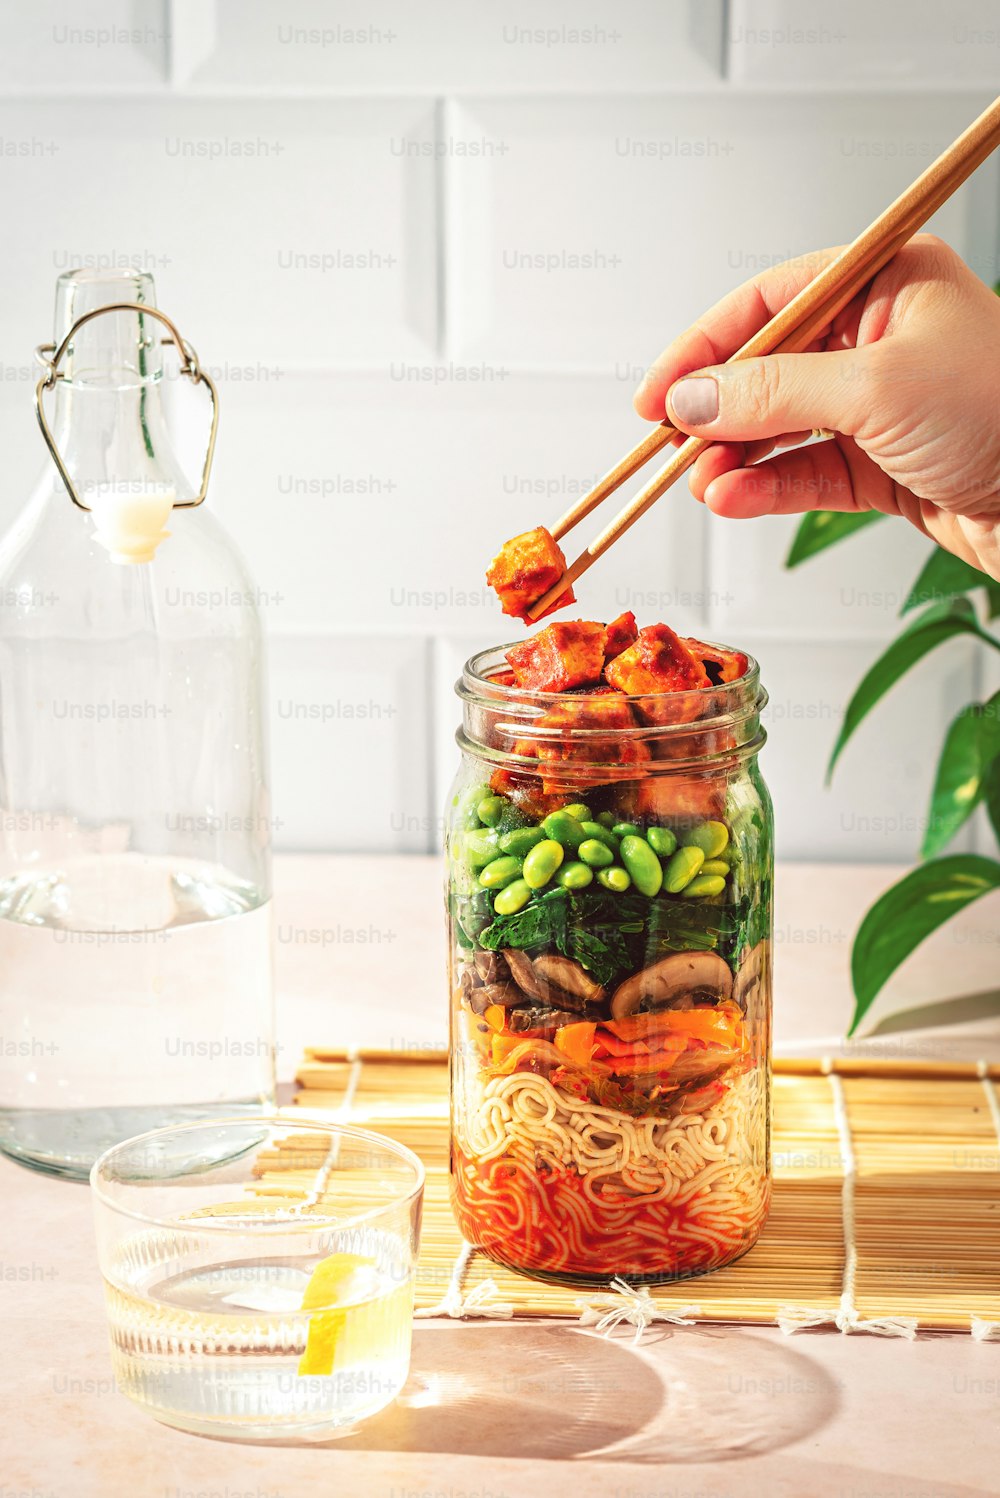 a person holding chopsticks over a jar of food